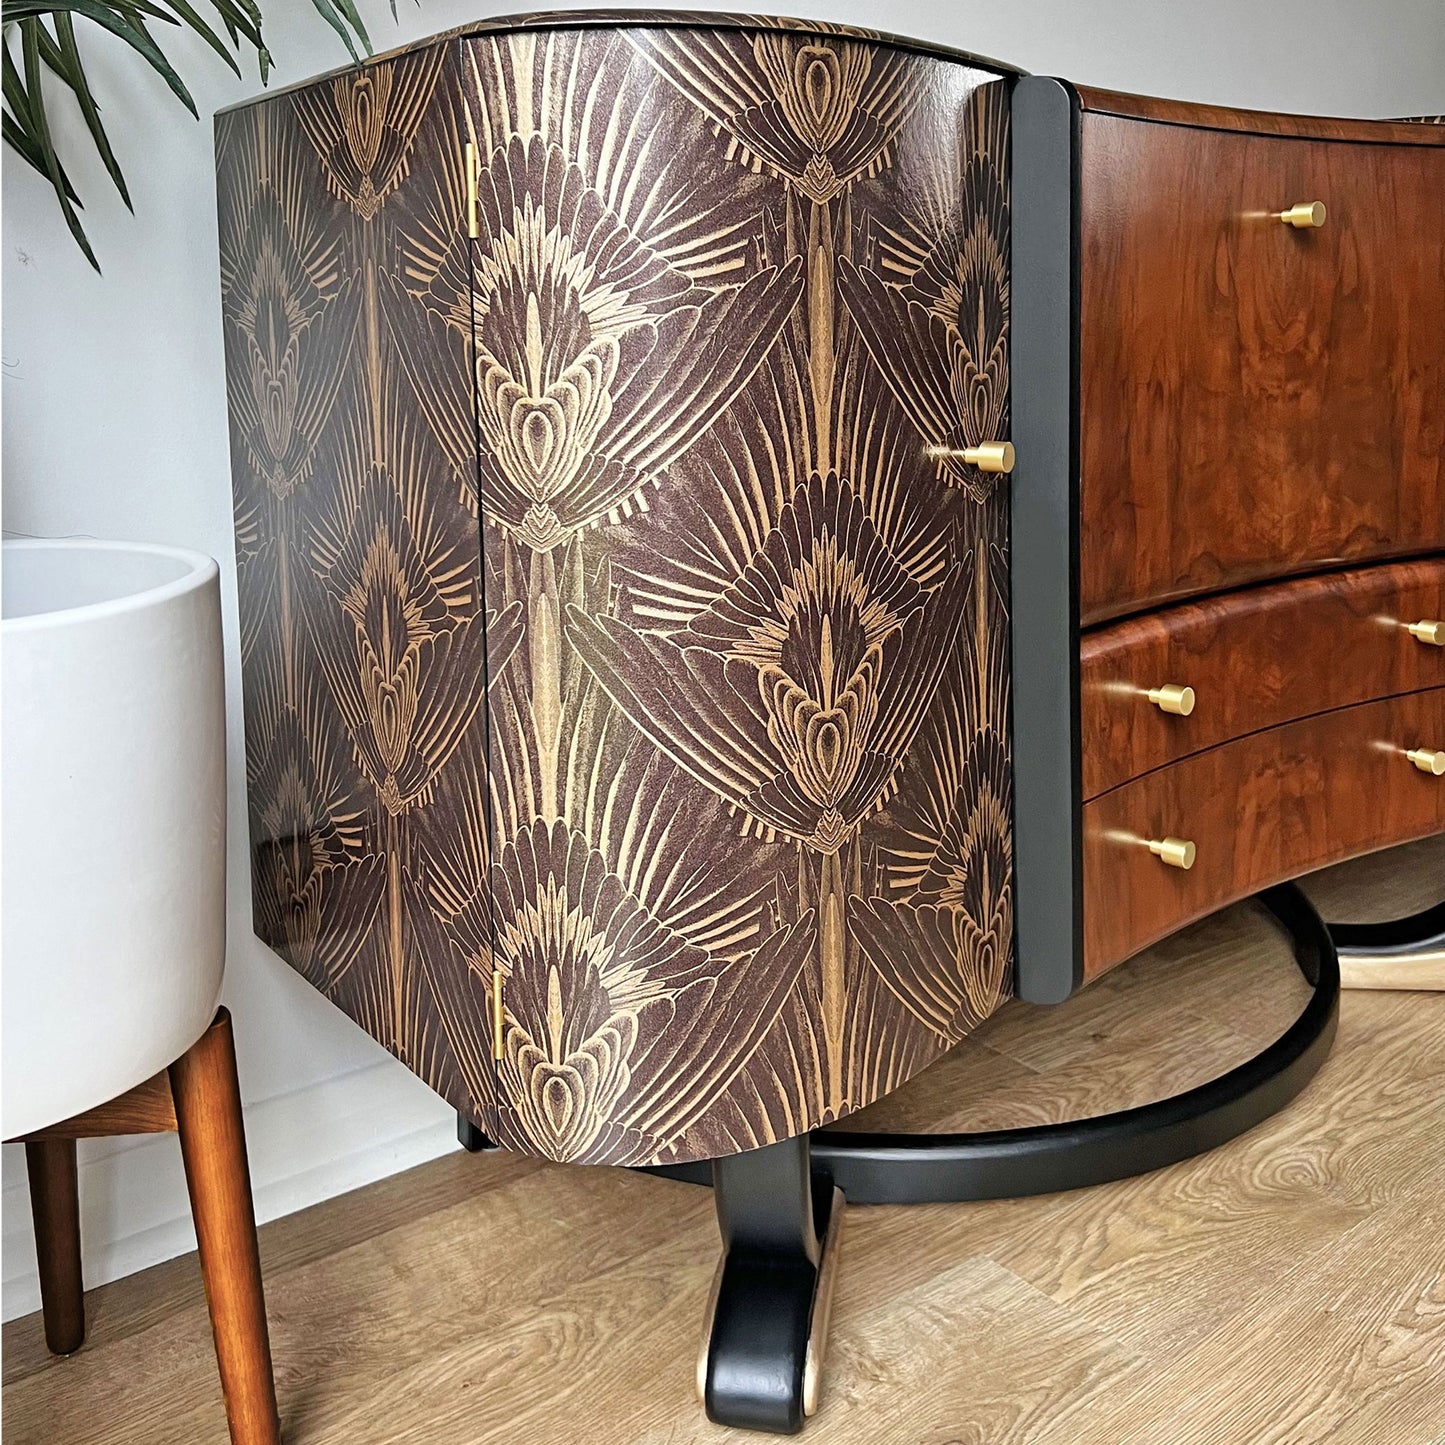 1920s Style Art Deco Beautility Walnut Sideboard Cocktail Cabinet - Black & Gold